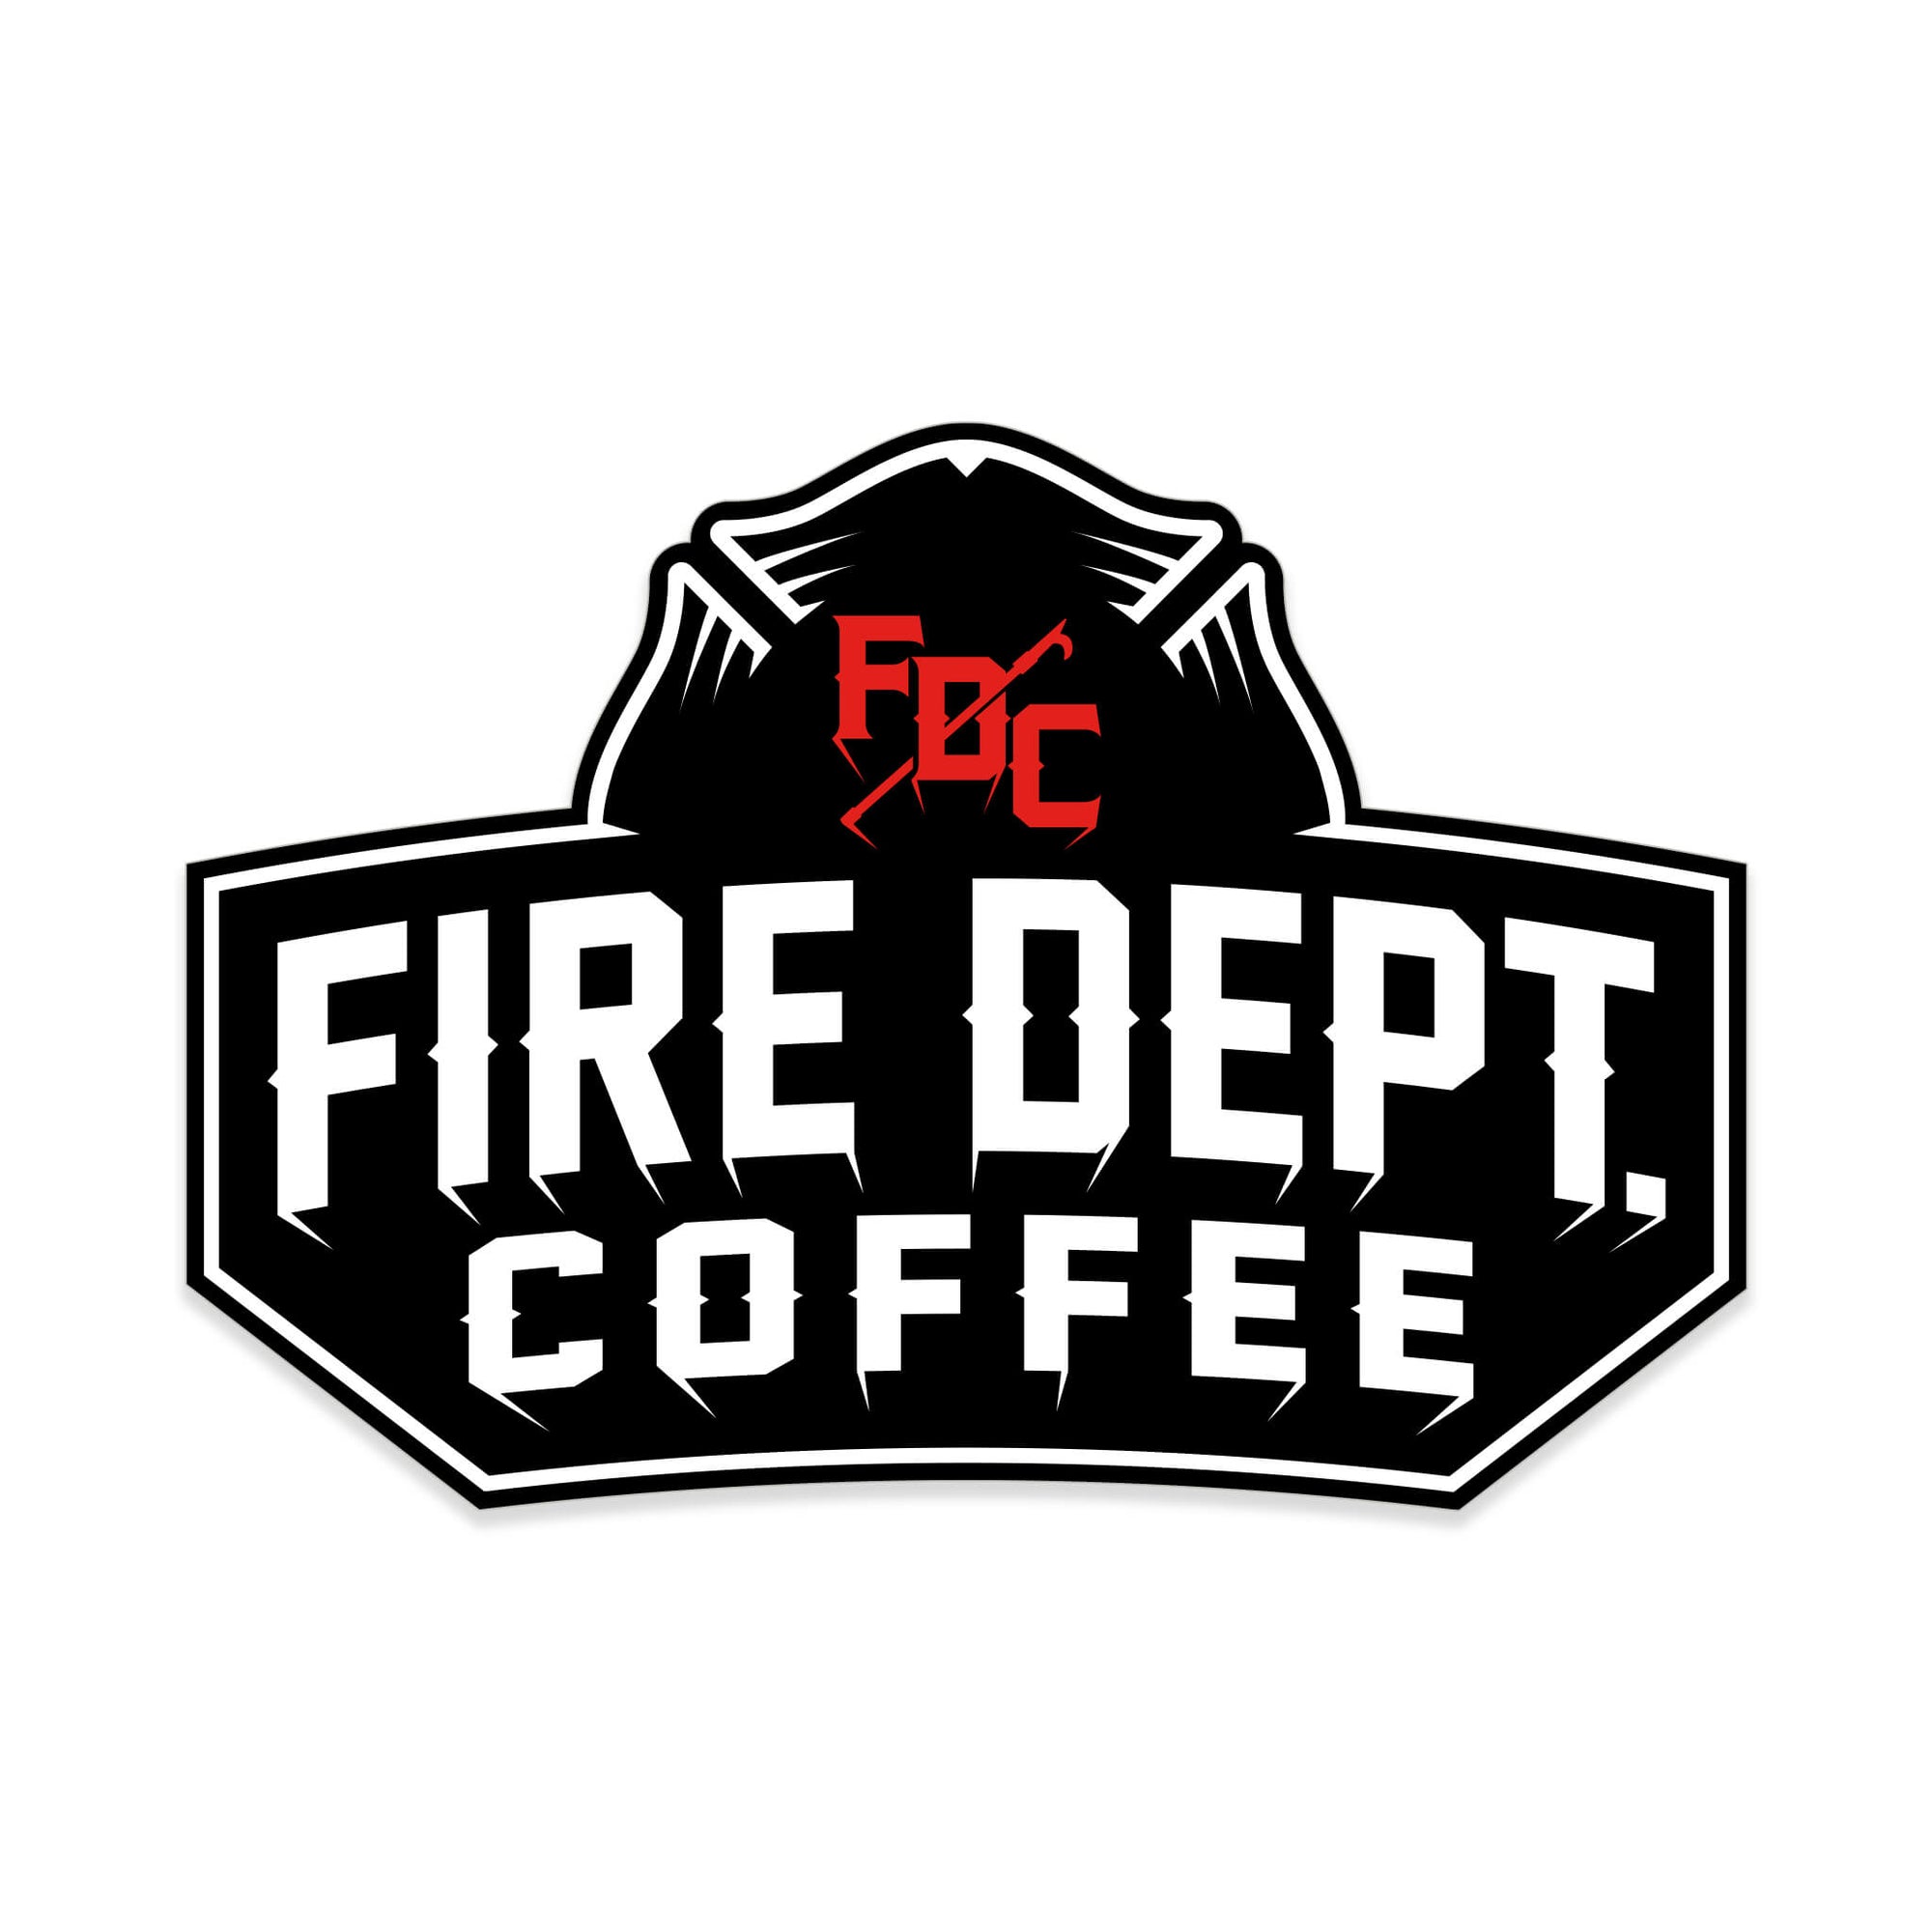 A black sticker with "Fire Dept. Coffee" in white lettering and a red FDC pike pole logo above